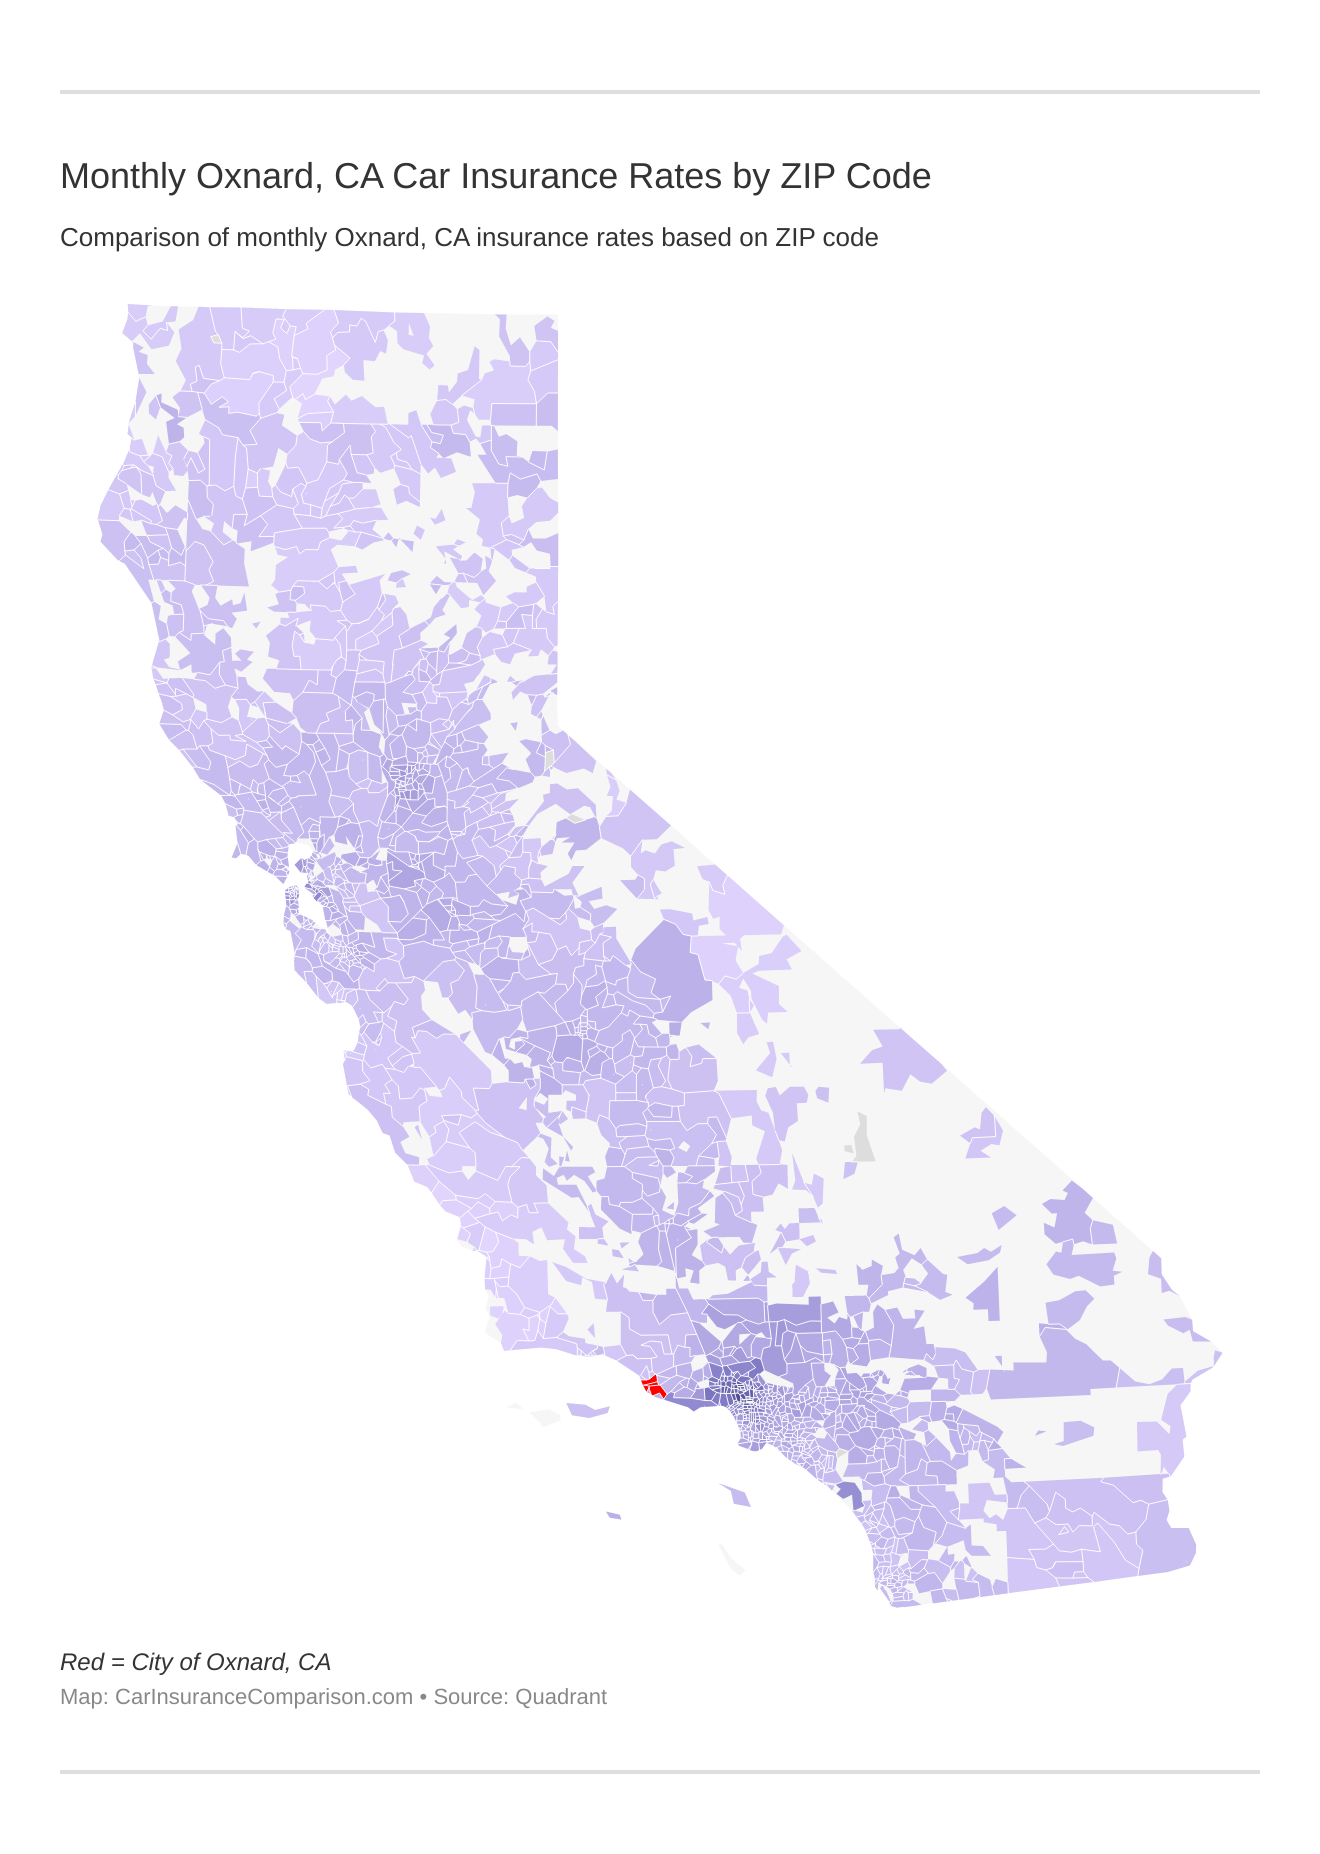 Monthly Oxnard, CA Car Insurance Rates by ZIP Code